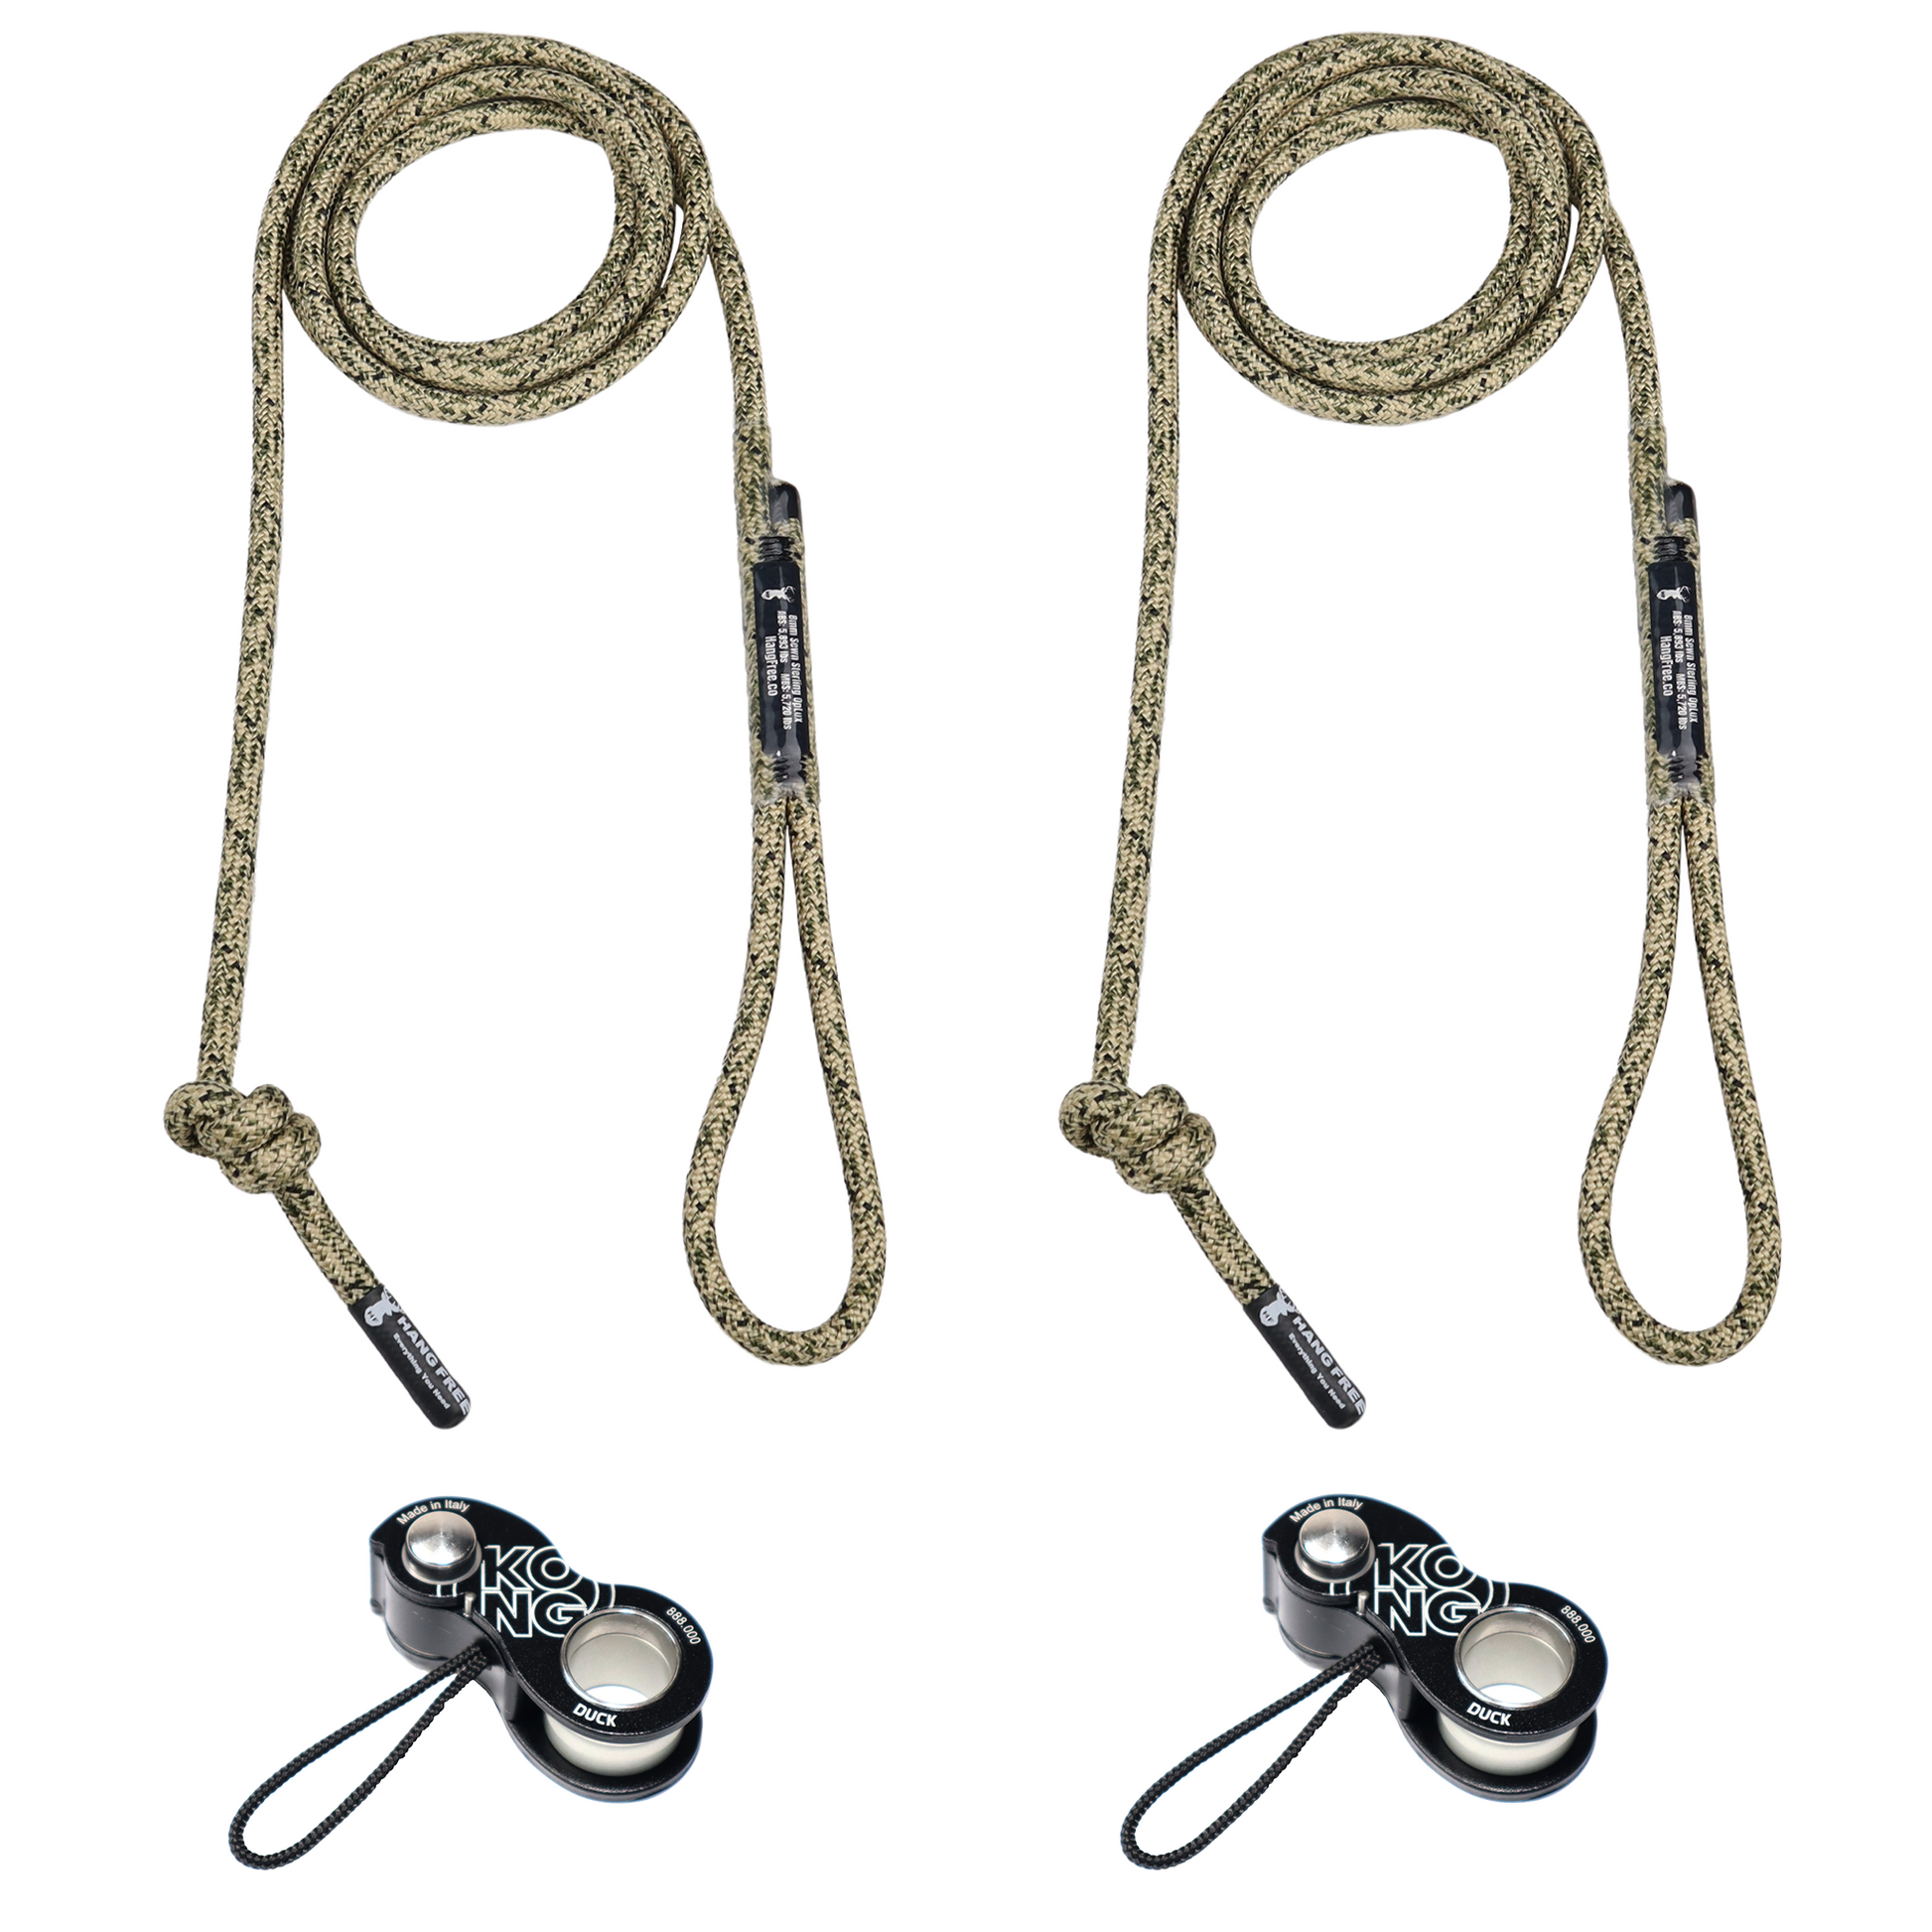 Sewn Deluxe OpLuxe Tether/Lineman's Package with Kongs